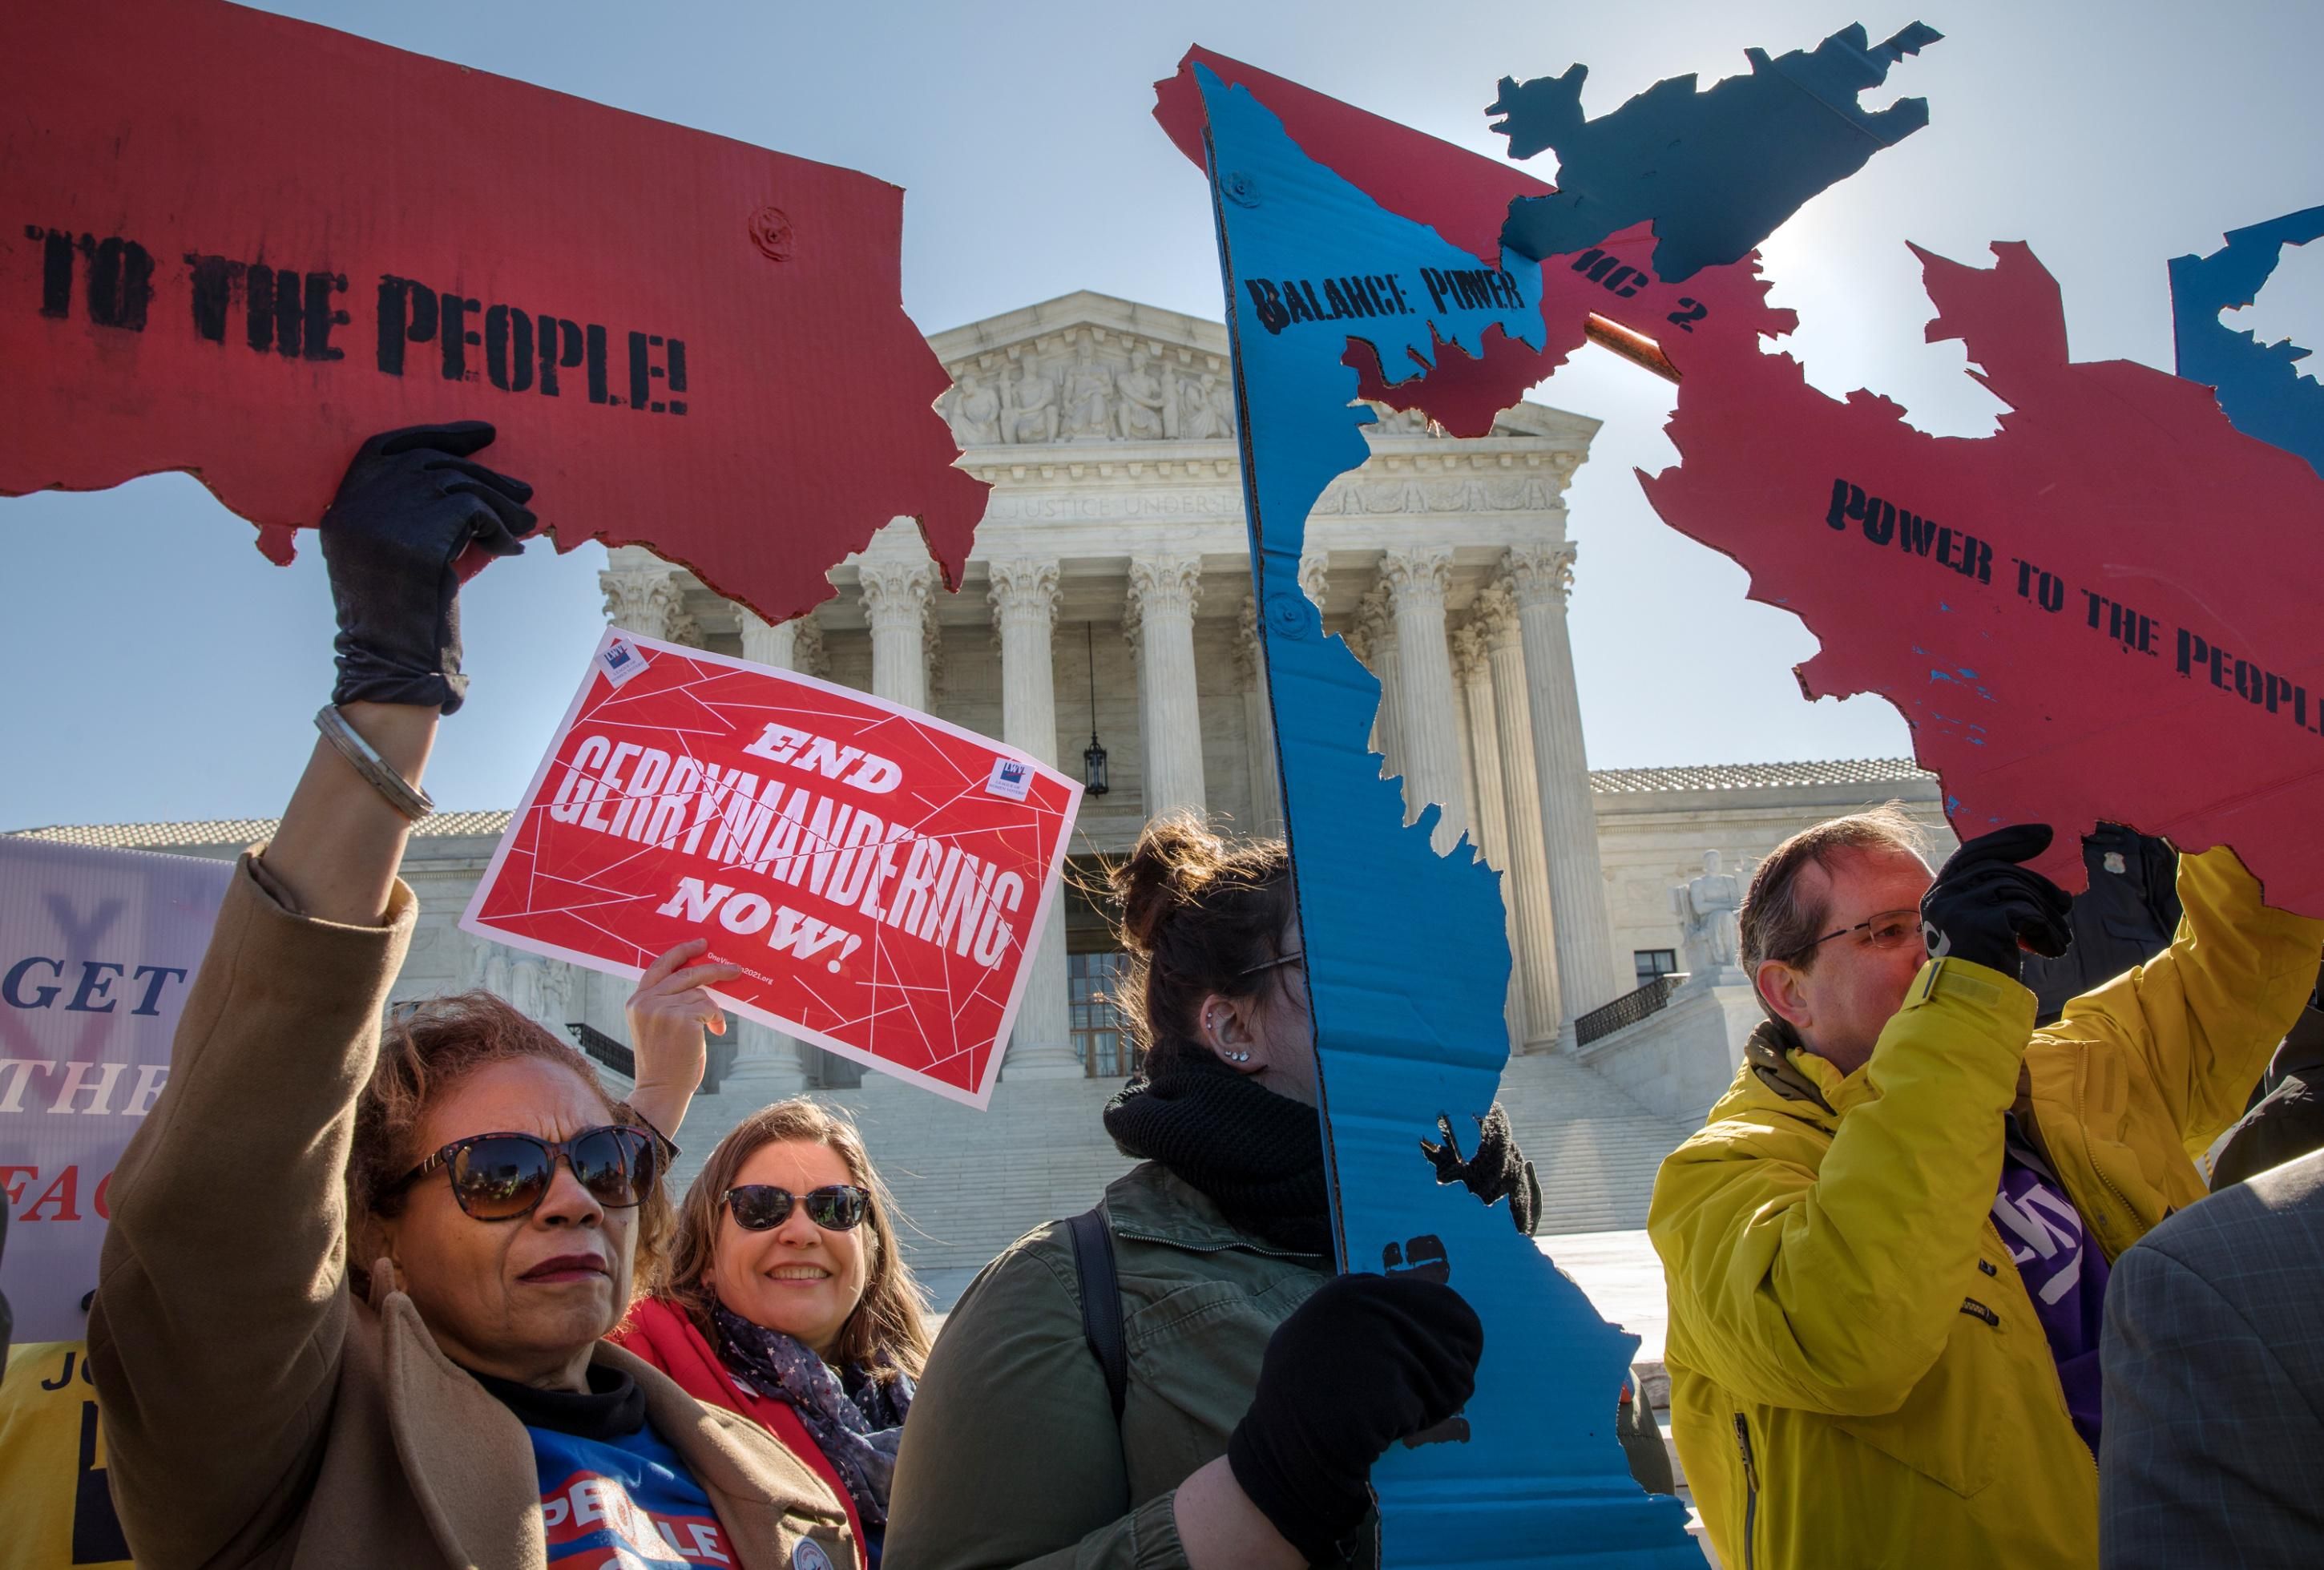 Demonstrators protest against gerrymandering at a rally in front of the U.S. Supreme Court on March 26, 2019, during the cases Lamone v. Benisek and Rucho v. Common Cause. (Photo: Evelyn Hockstein/Washington Post via Getty Images)